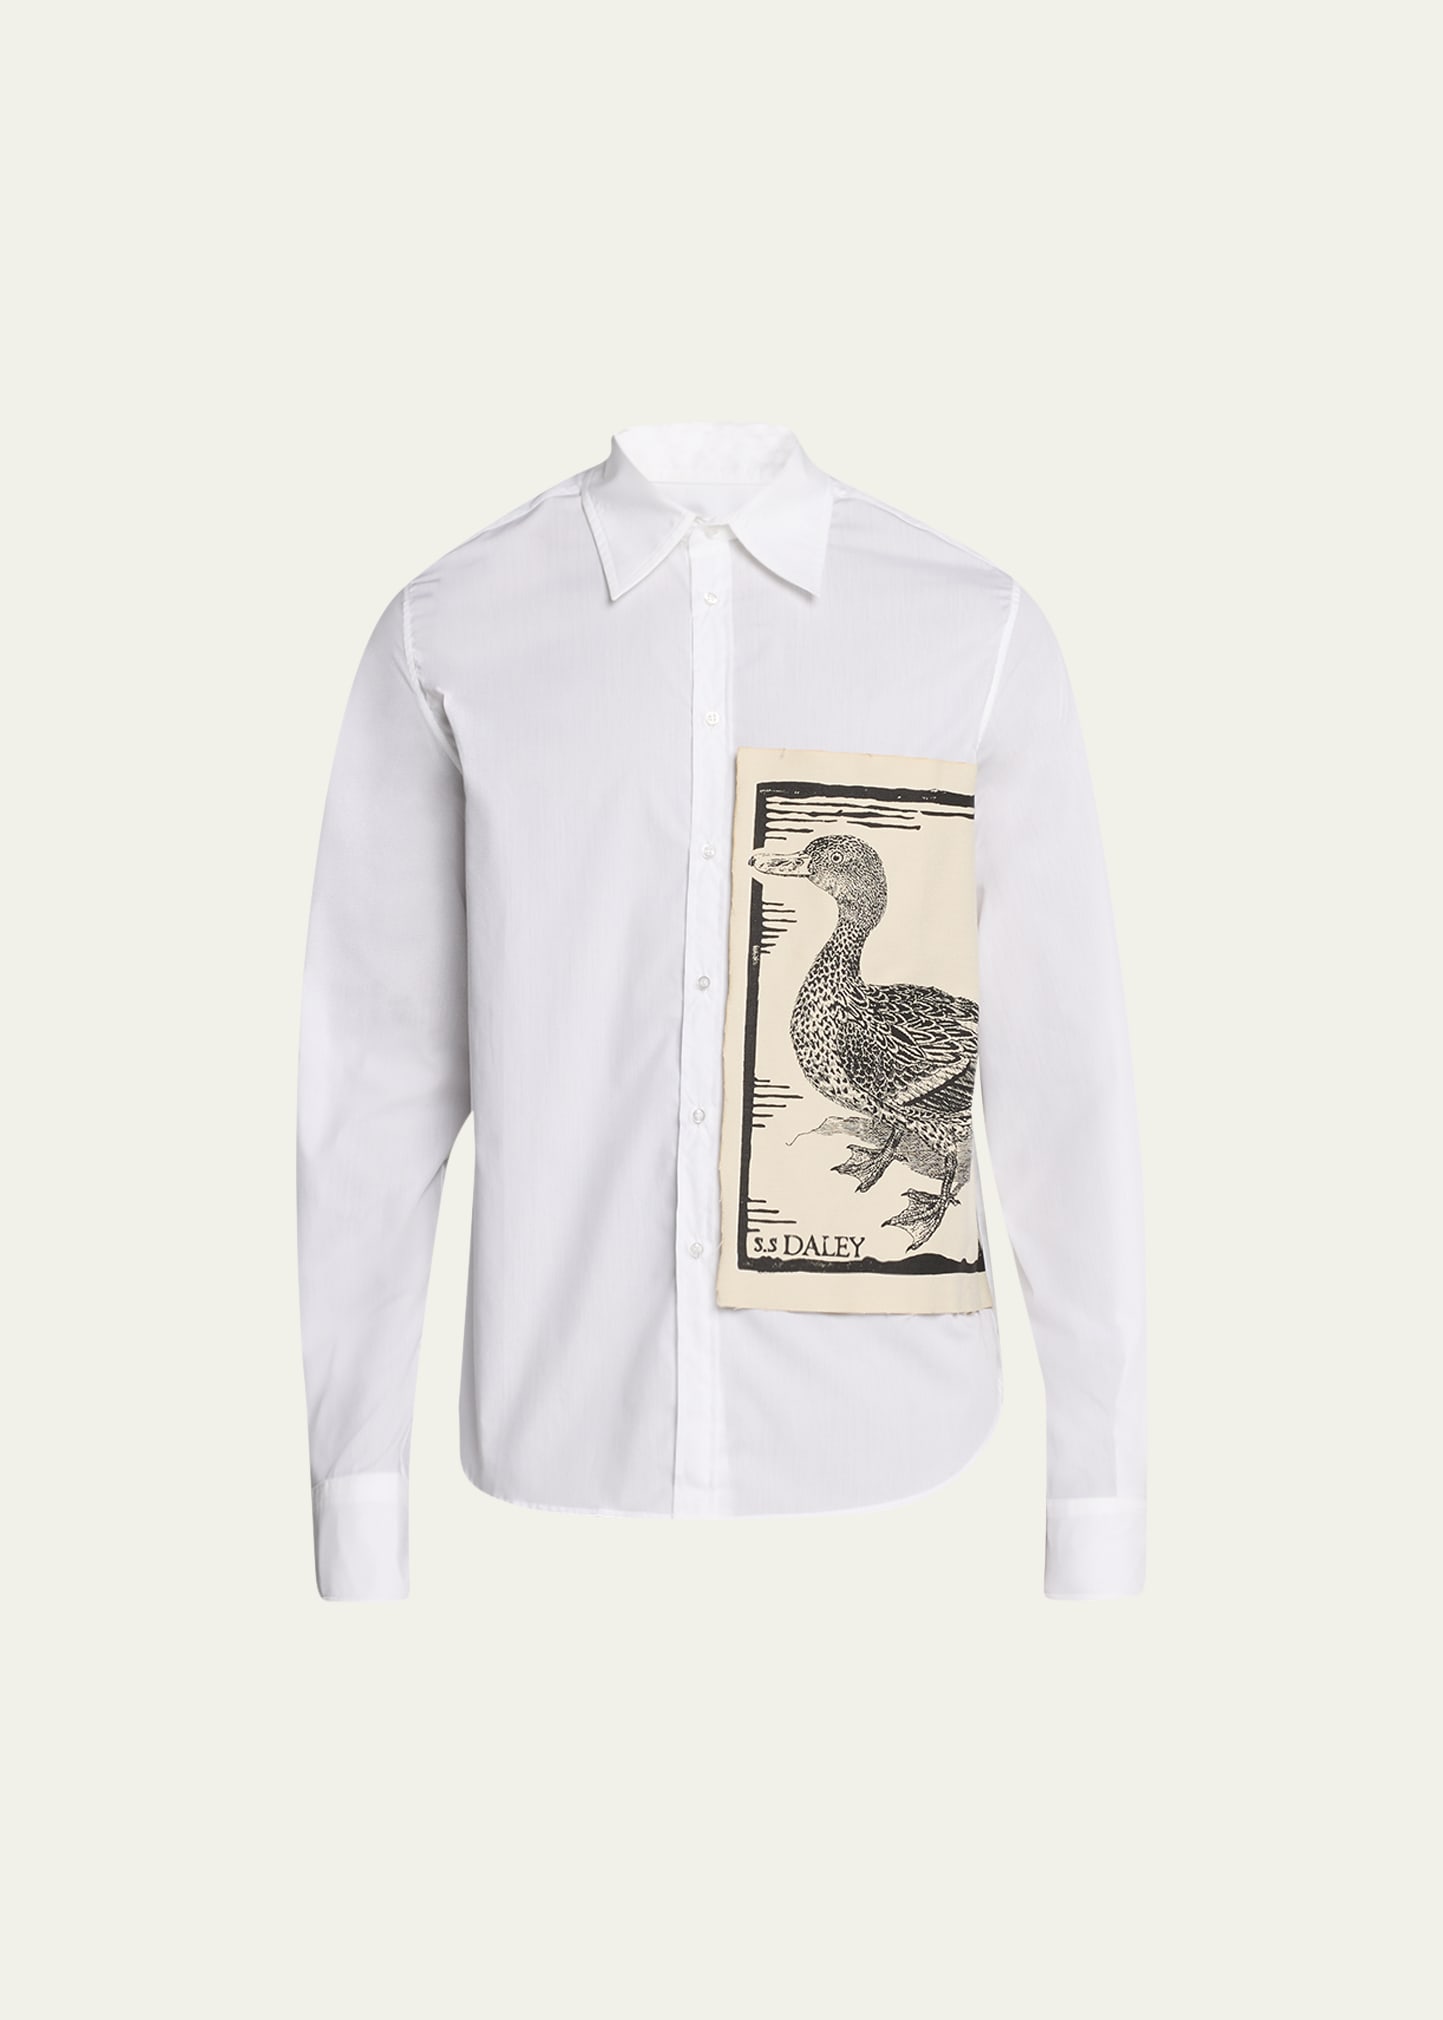 S.S. DALEY Men's Harvey Sport Shirt with Duck Patch